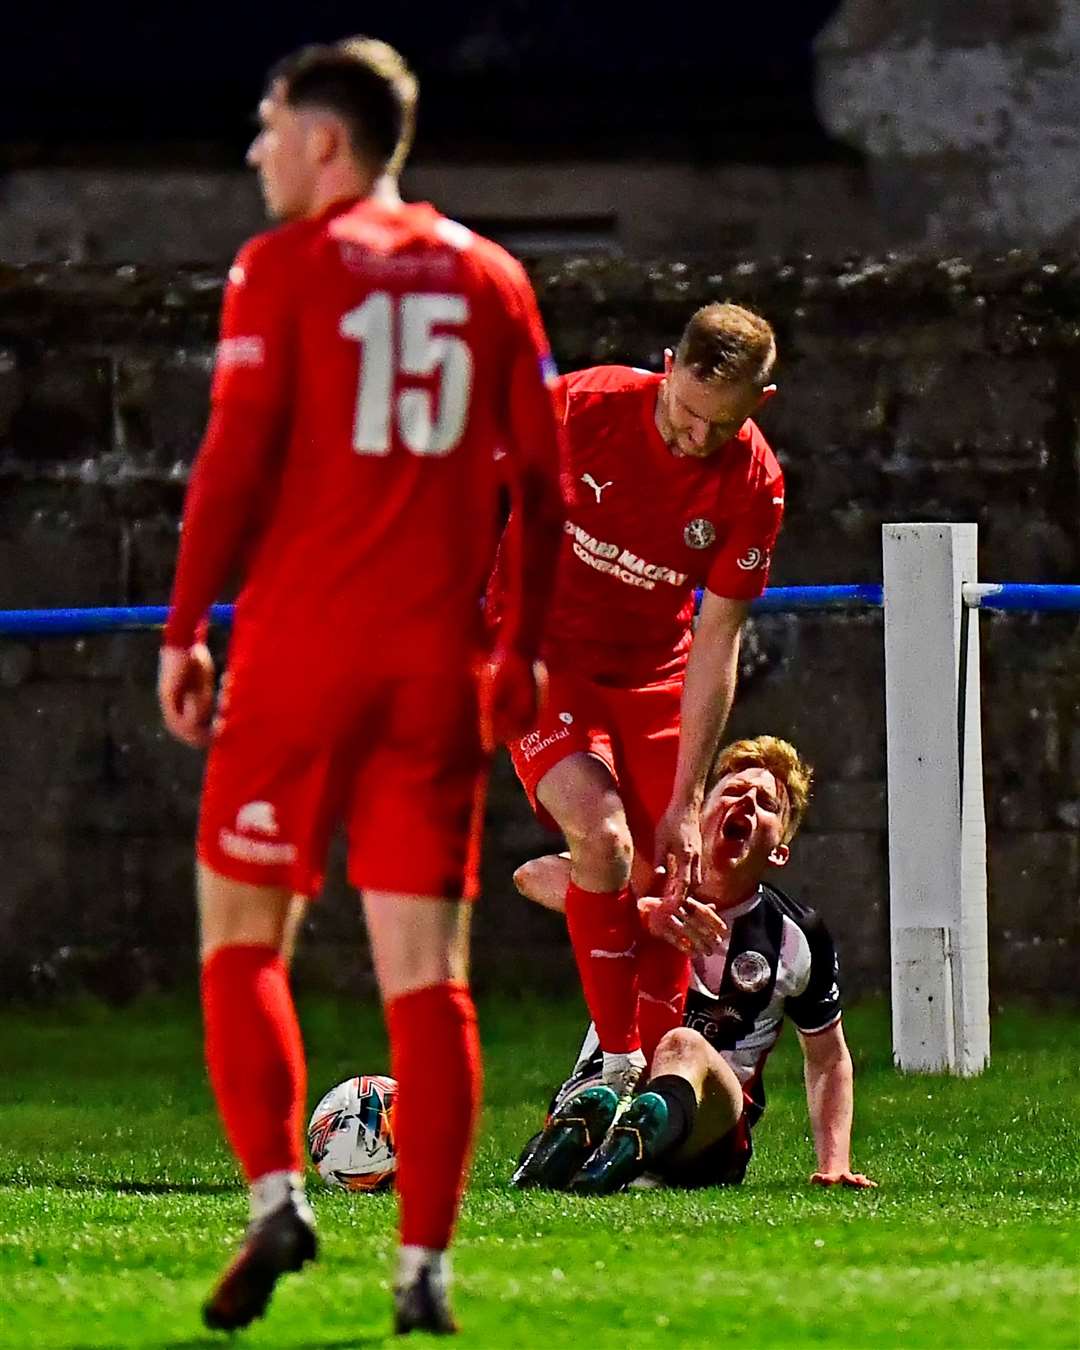 A painful one for Ross Gunn as Brora Rangers' Mark Nicolson appears to stand on him during the match at King George V Park in Golspie. Picture: Mel Roger